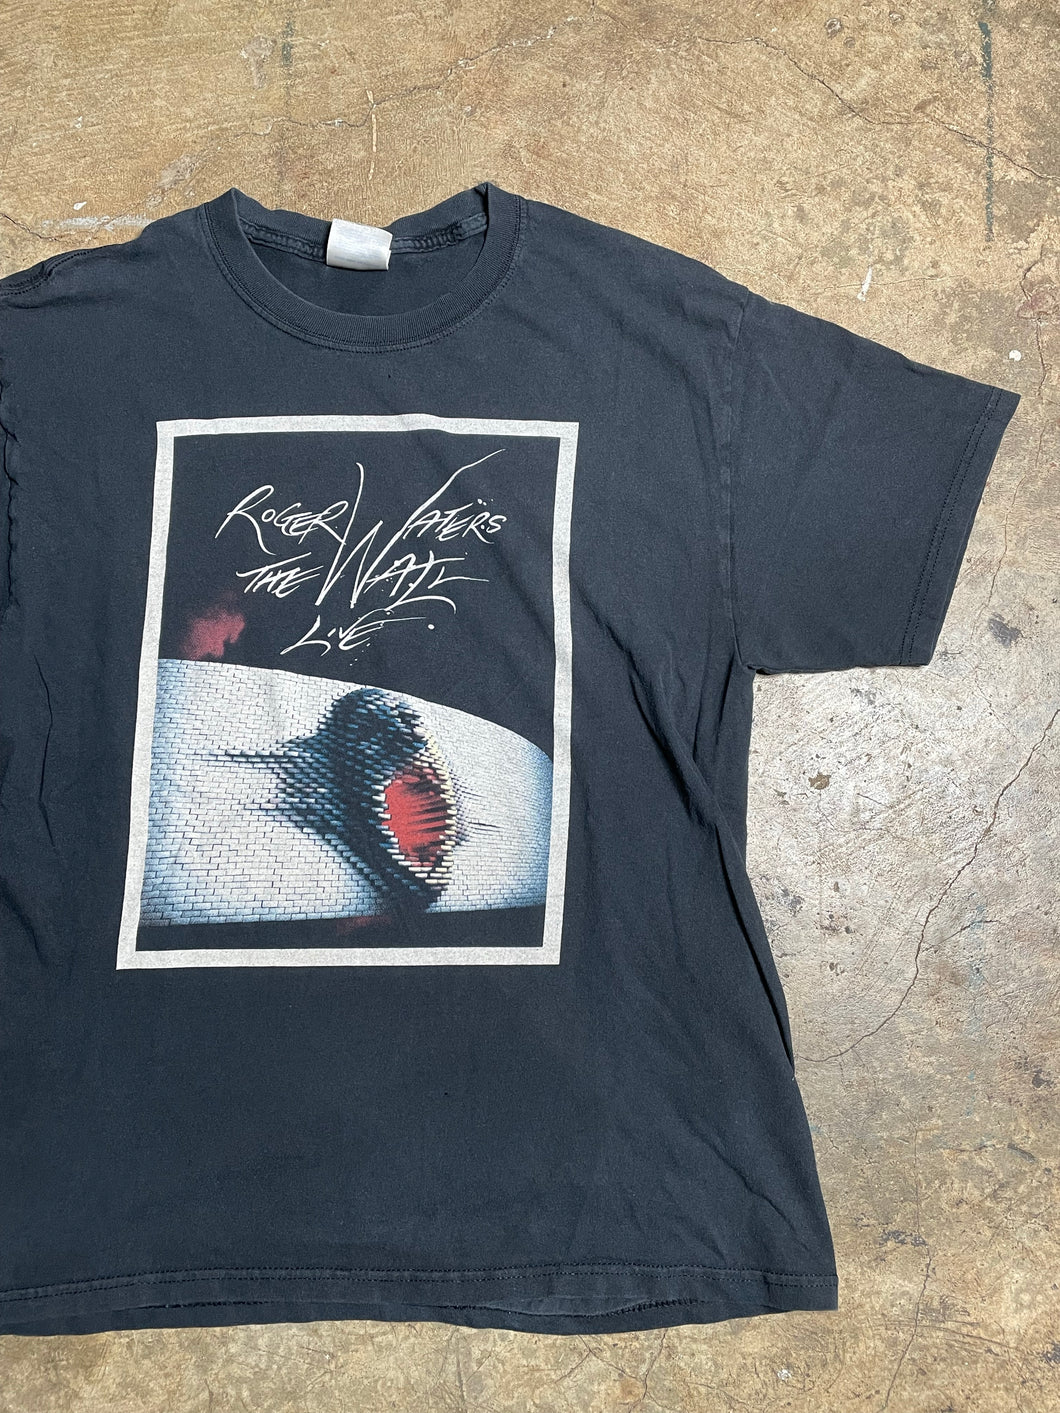 Y2K Roger Waters The Wall Tee - L